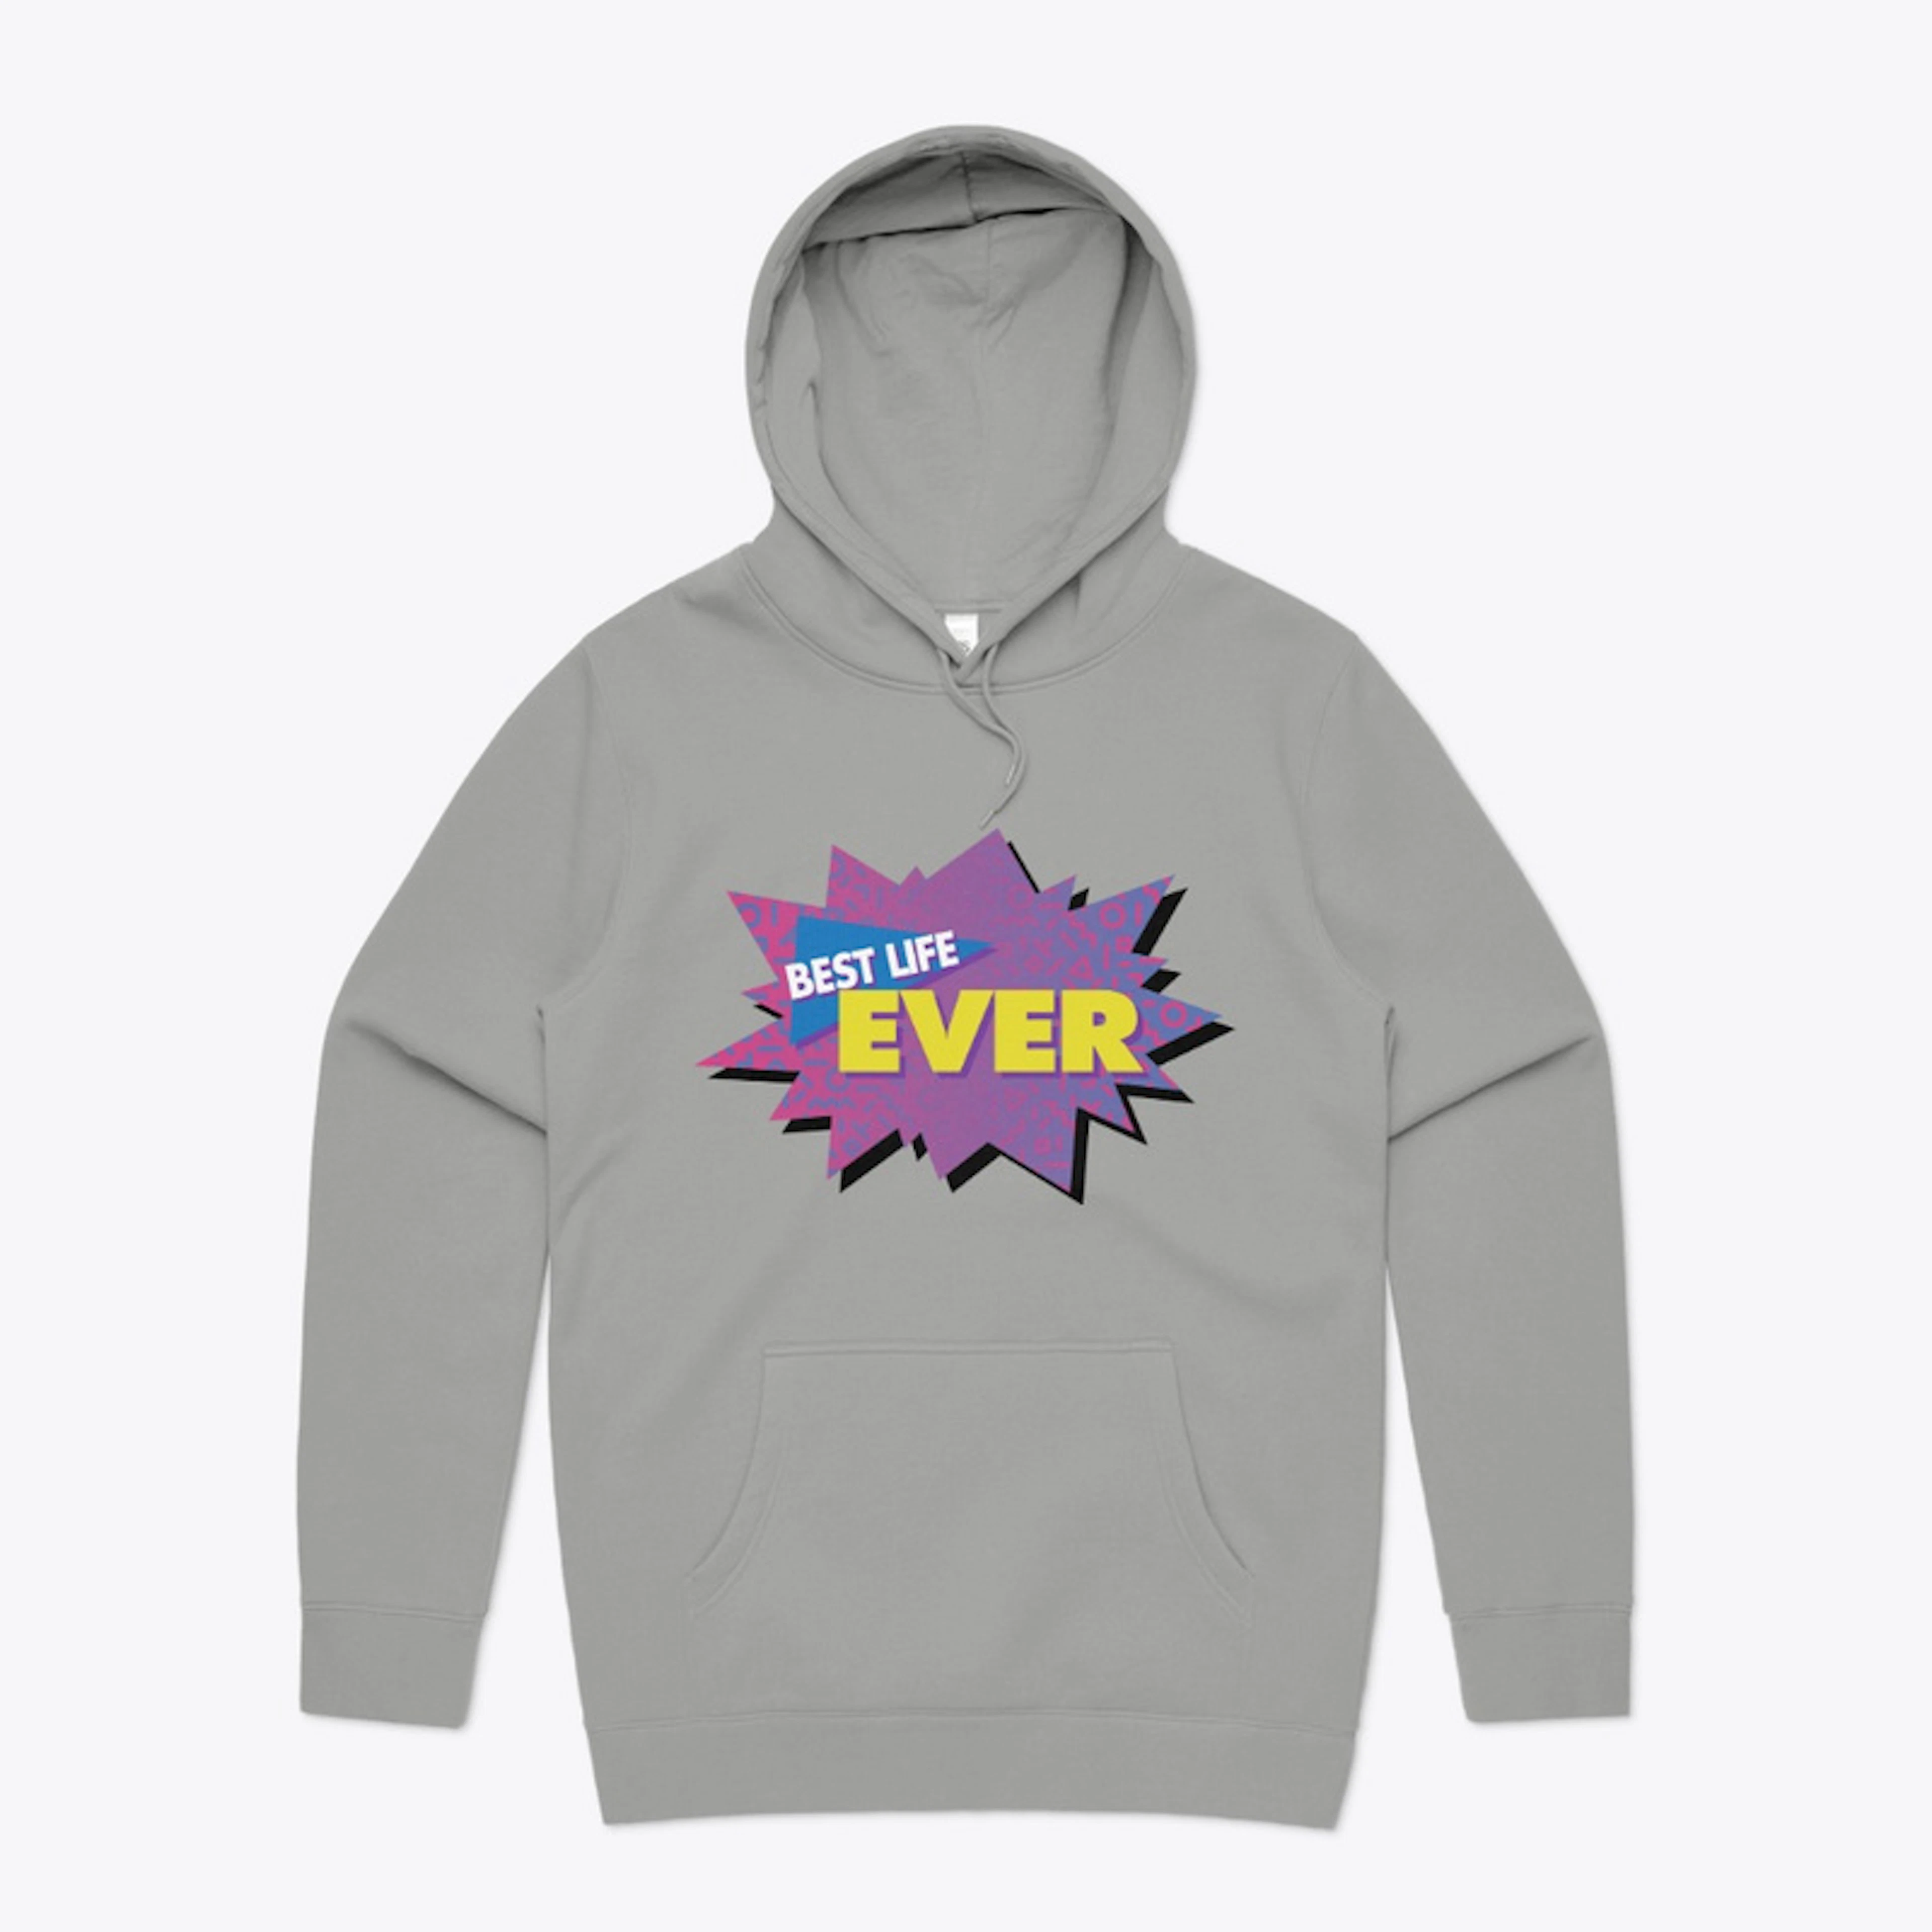 Retro 80s Themed Best Life Ever Clothes